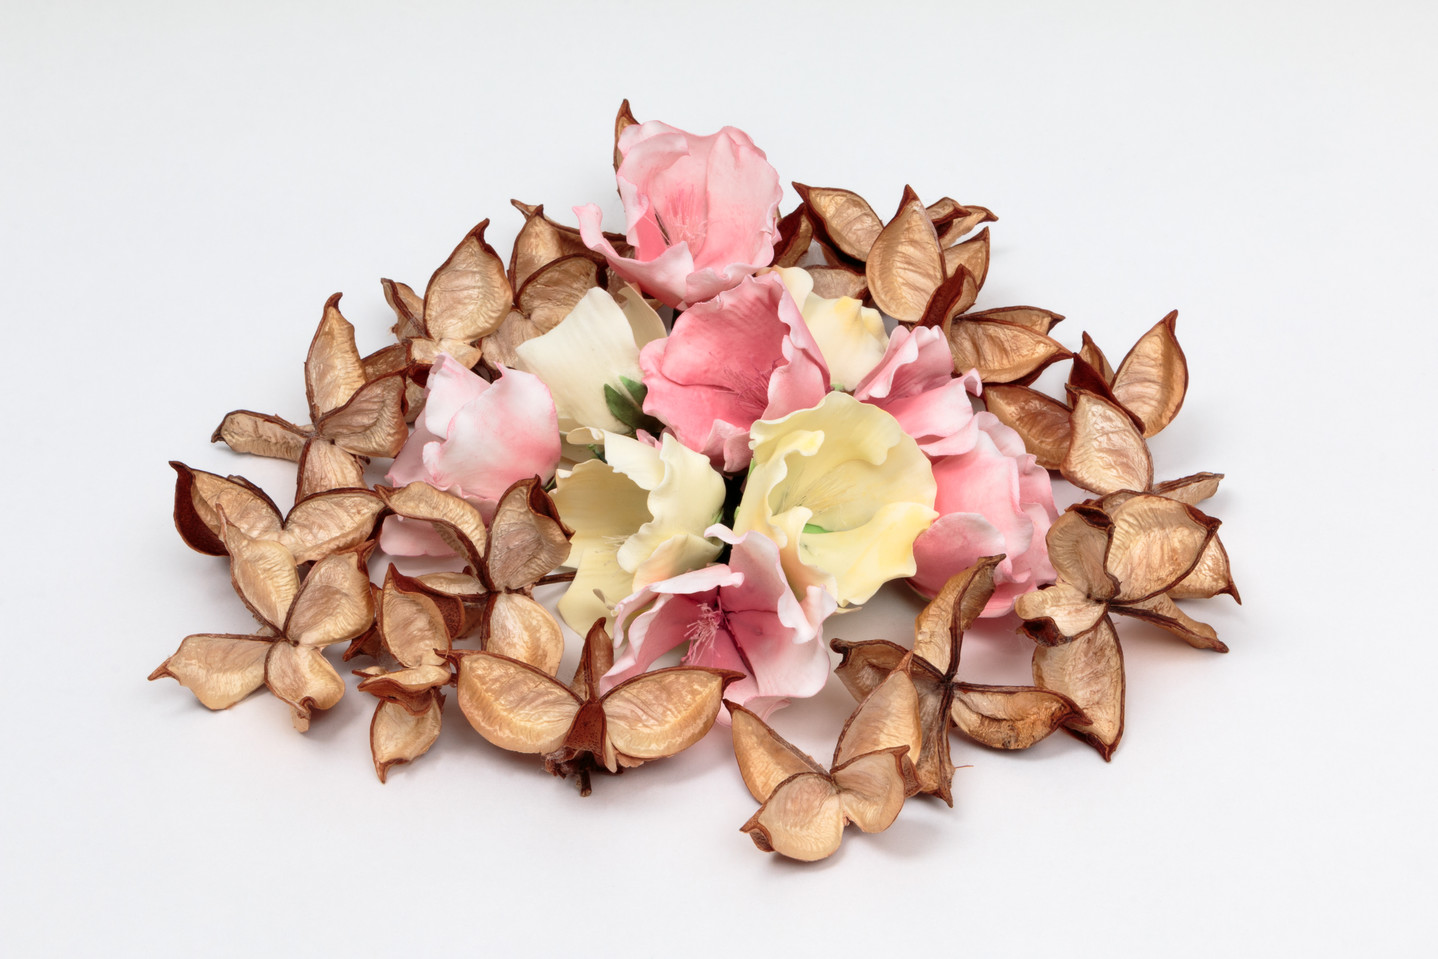 A three-dimensional artwork featuring a pile of opened, pale brown cotton pods surrounding white and pink flowers made of sugar.